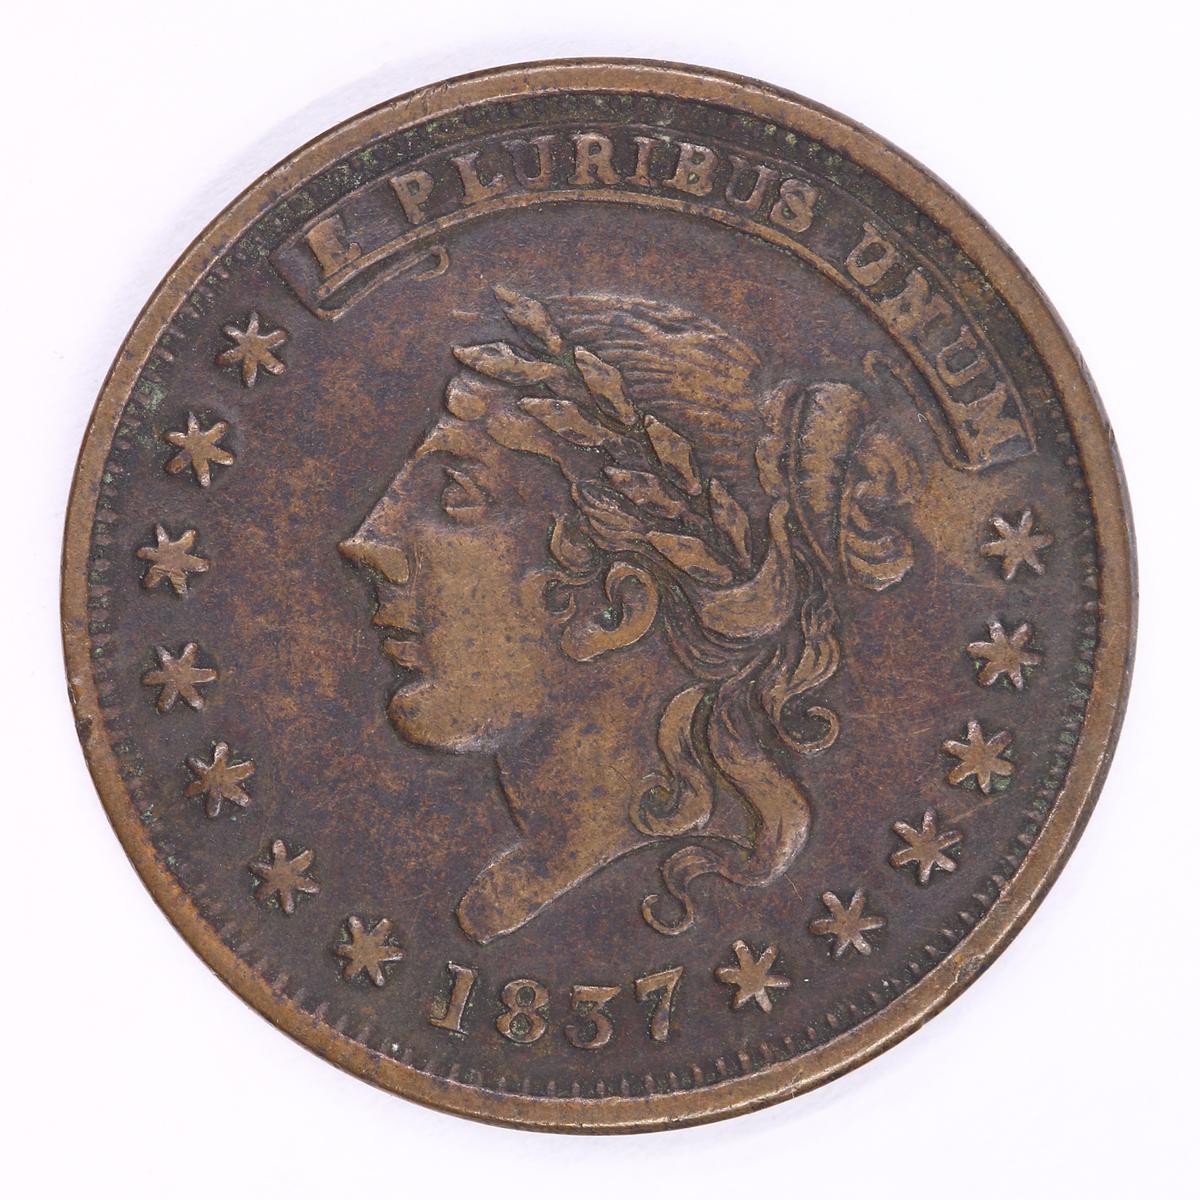 1837 Hard Times Token- Liberty-Not One Cent